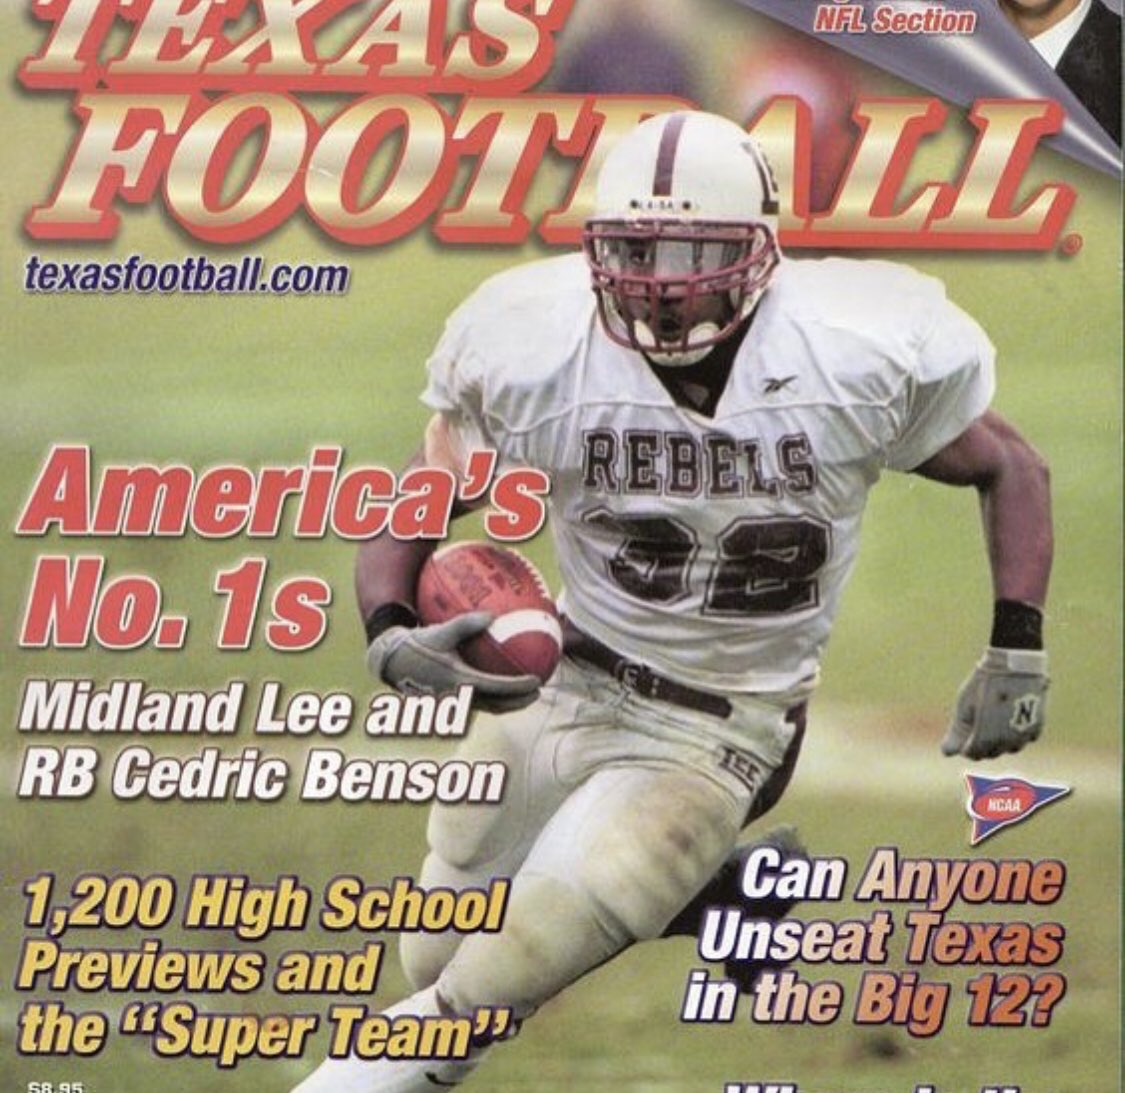 If you are from #Texas you will@remember this magazine . RIP RestInPower  #CedricBenson https://t.co/kSZhsReryy